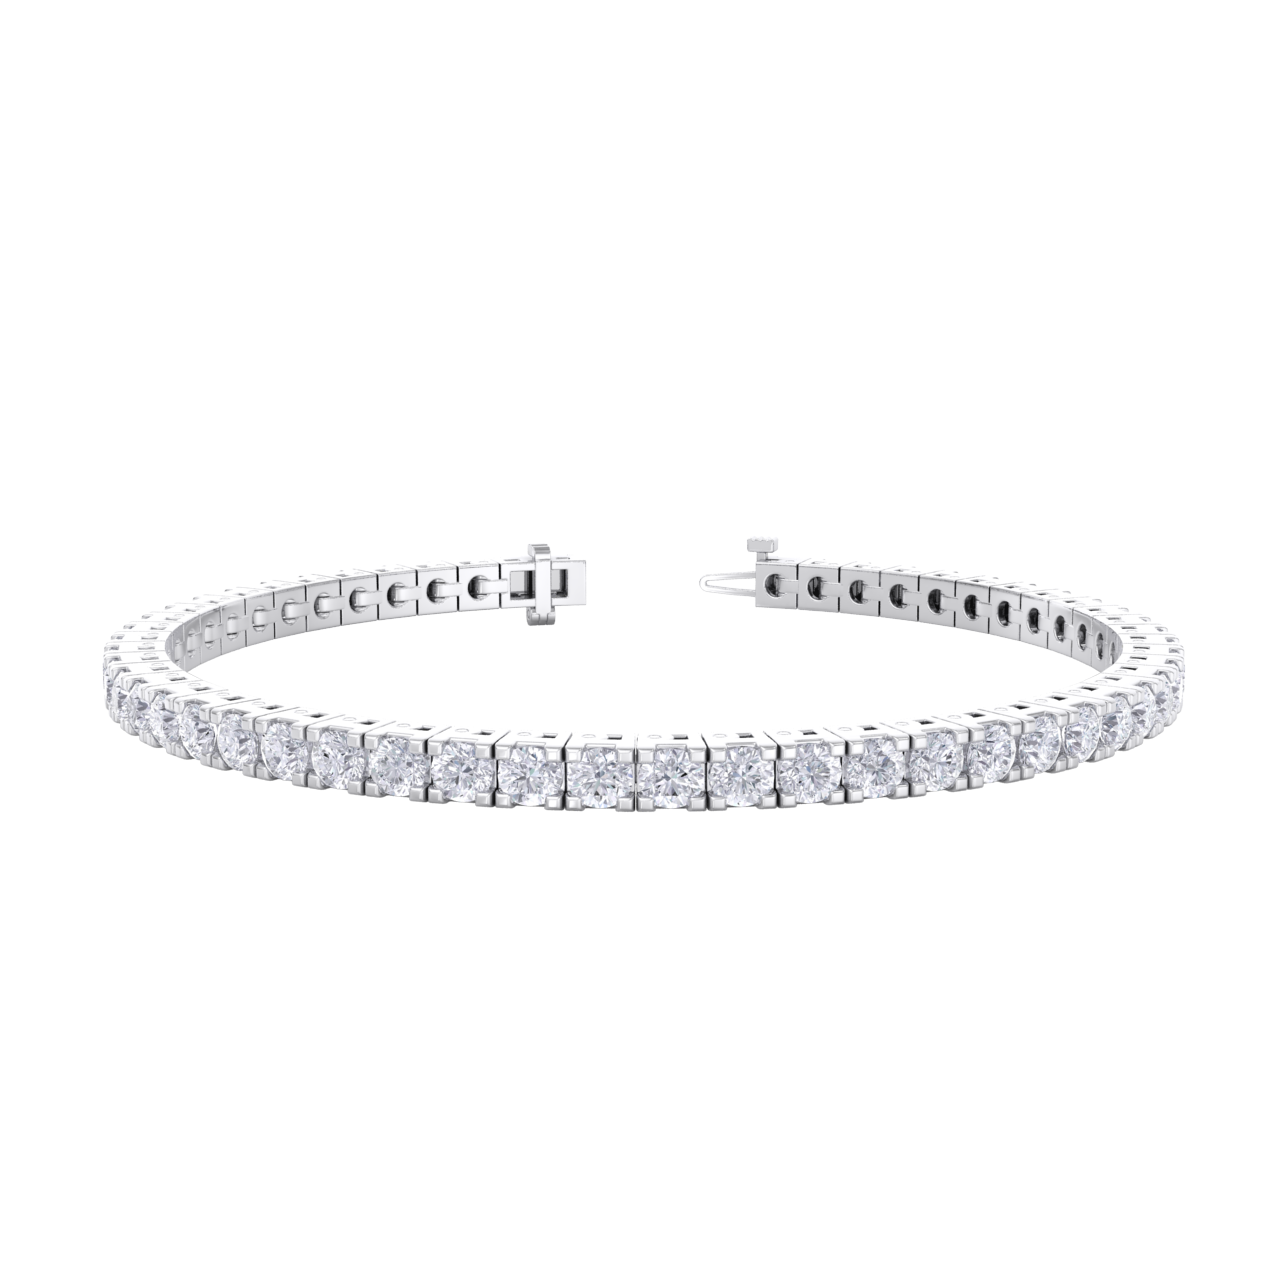 Bracelet in white gold with white diamonds of 5.72 ct in weight